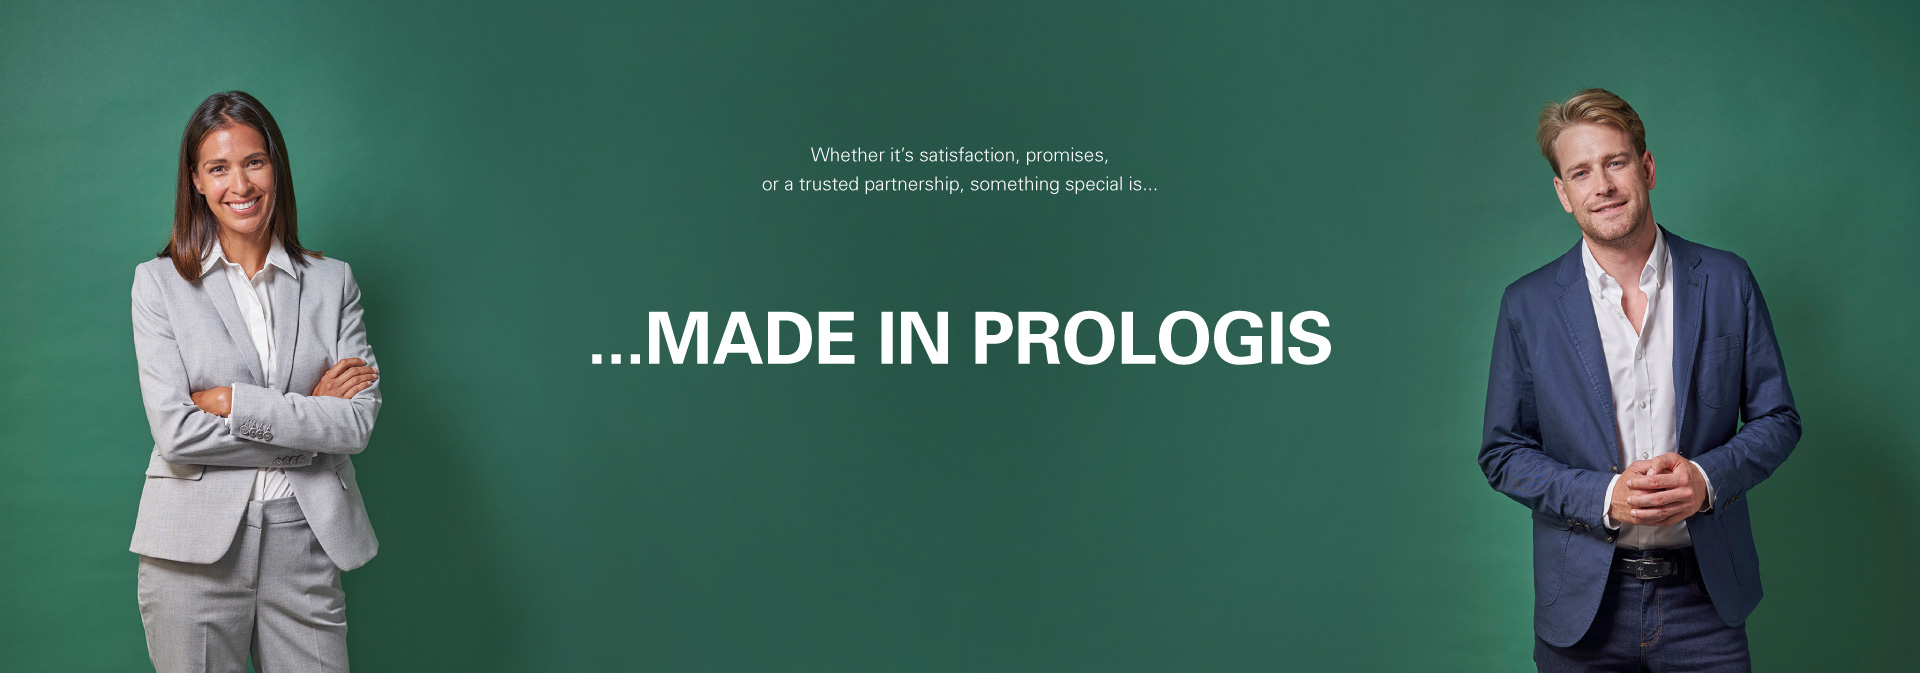 Made in Prologis